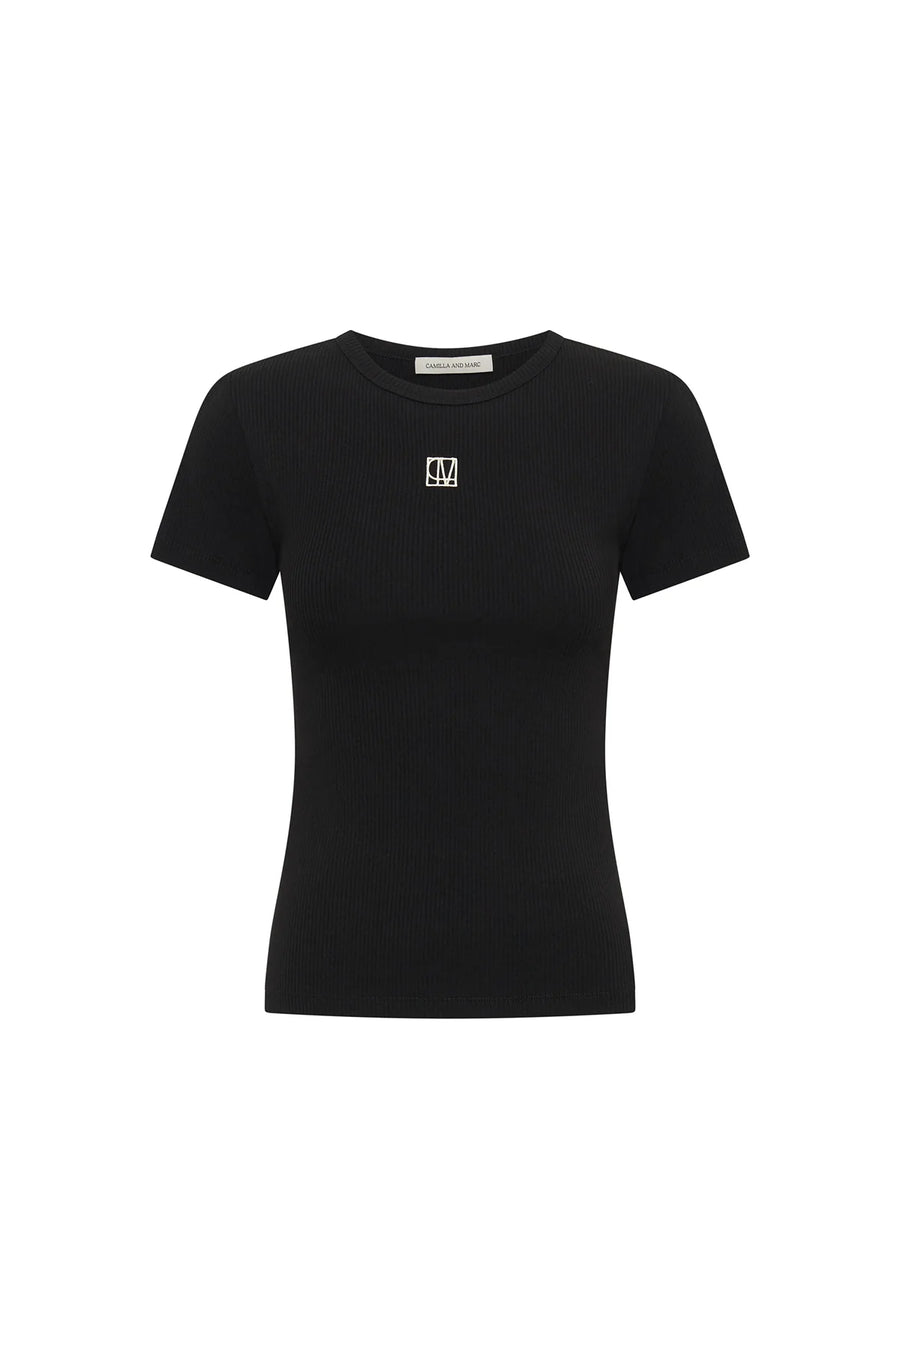 Marc Nora Fitted Tee Black